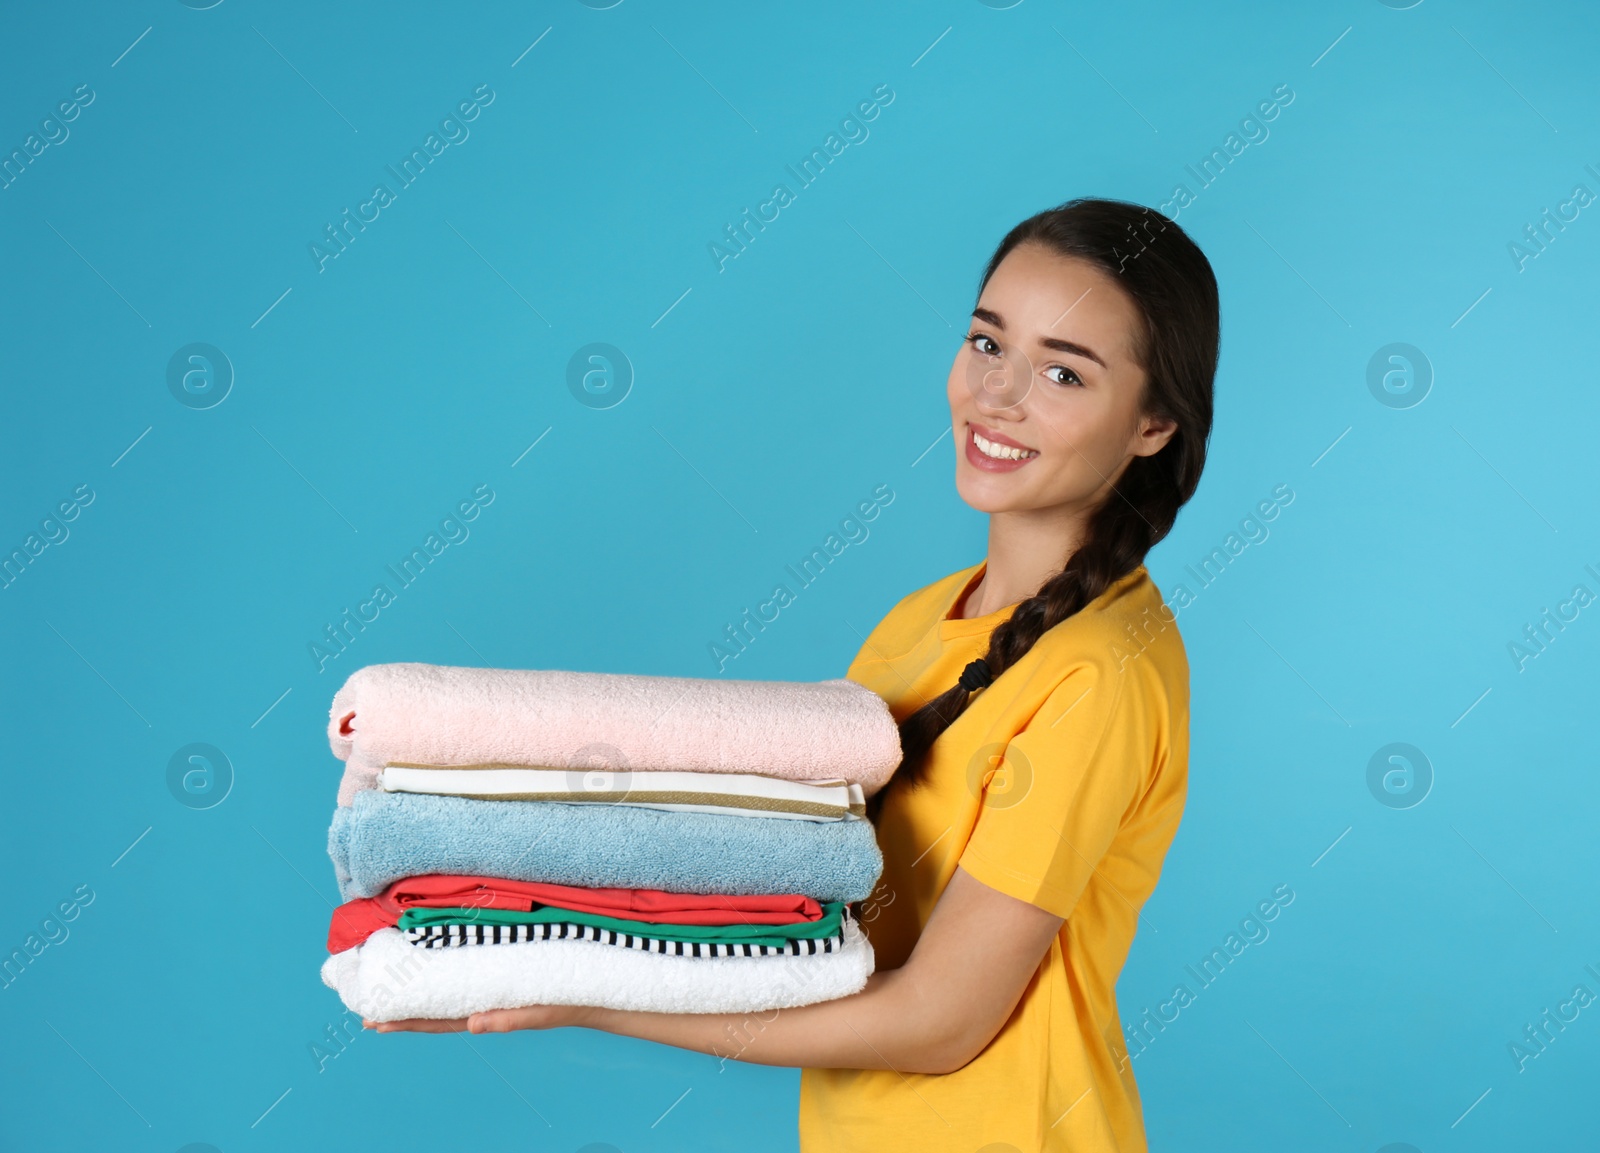 Photo of Happy young woman holding clean laundry on color background